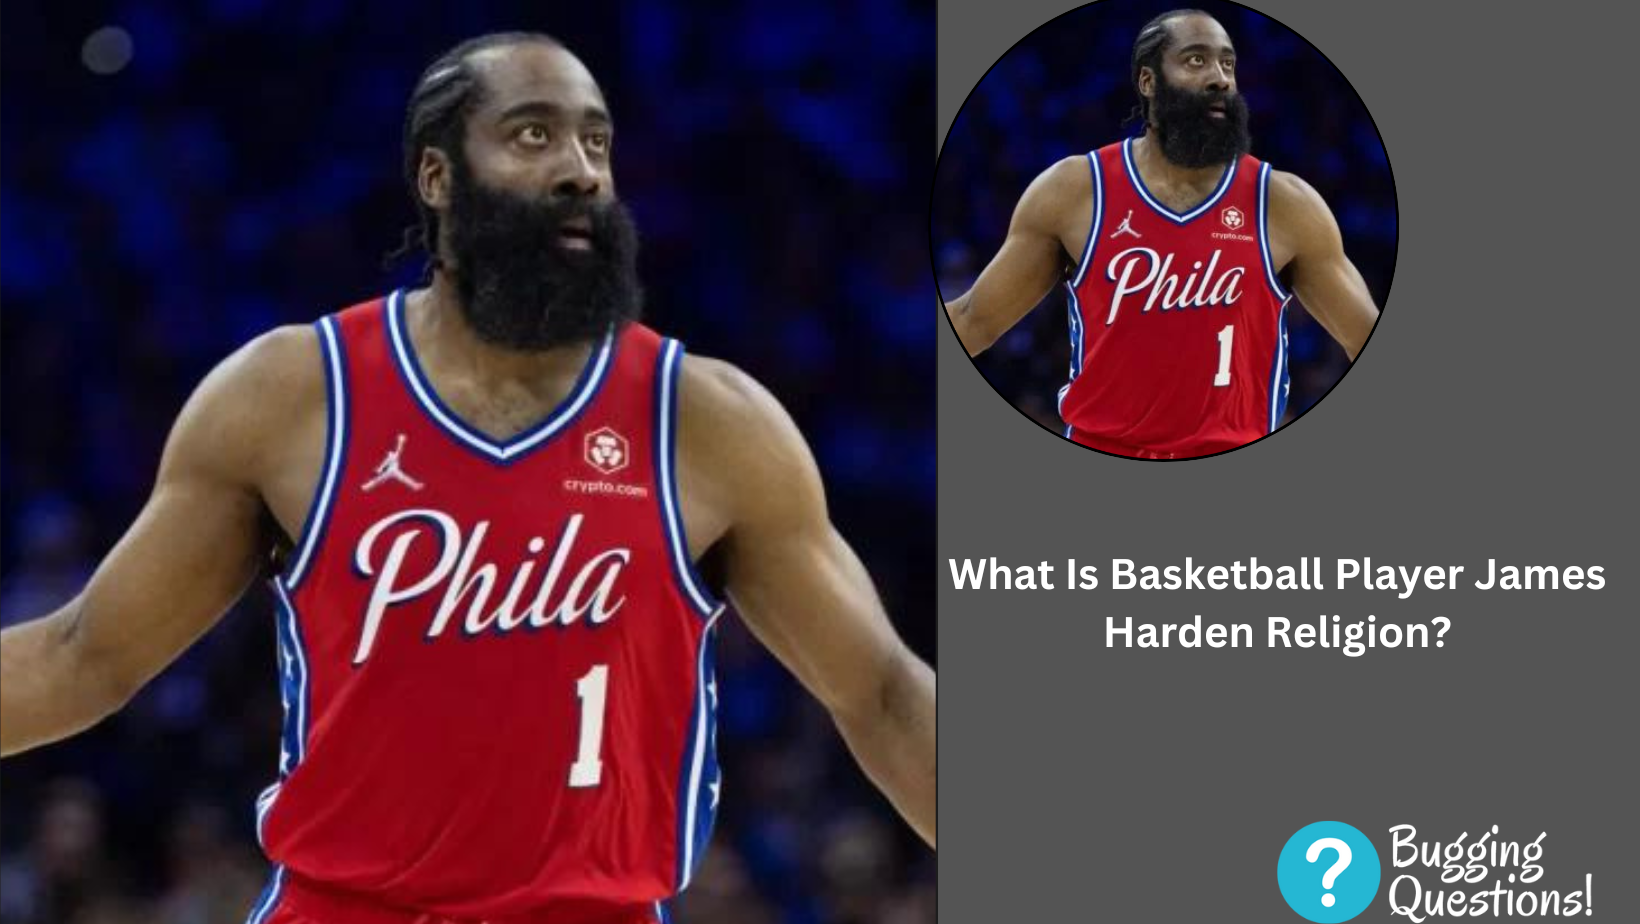 What Is Basketball Player James Harden Religion?